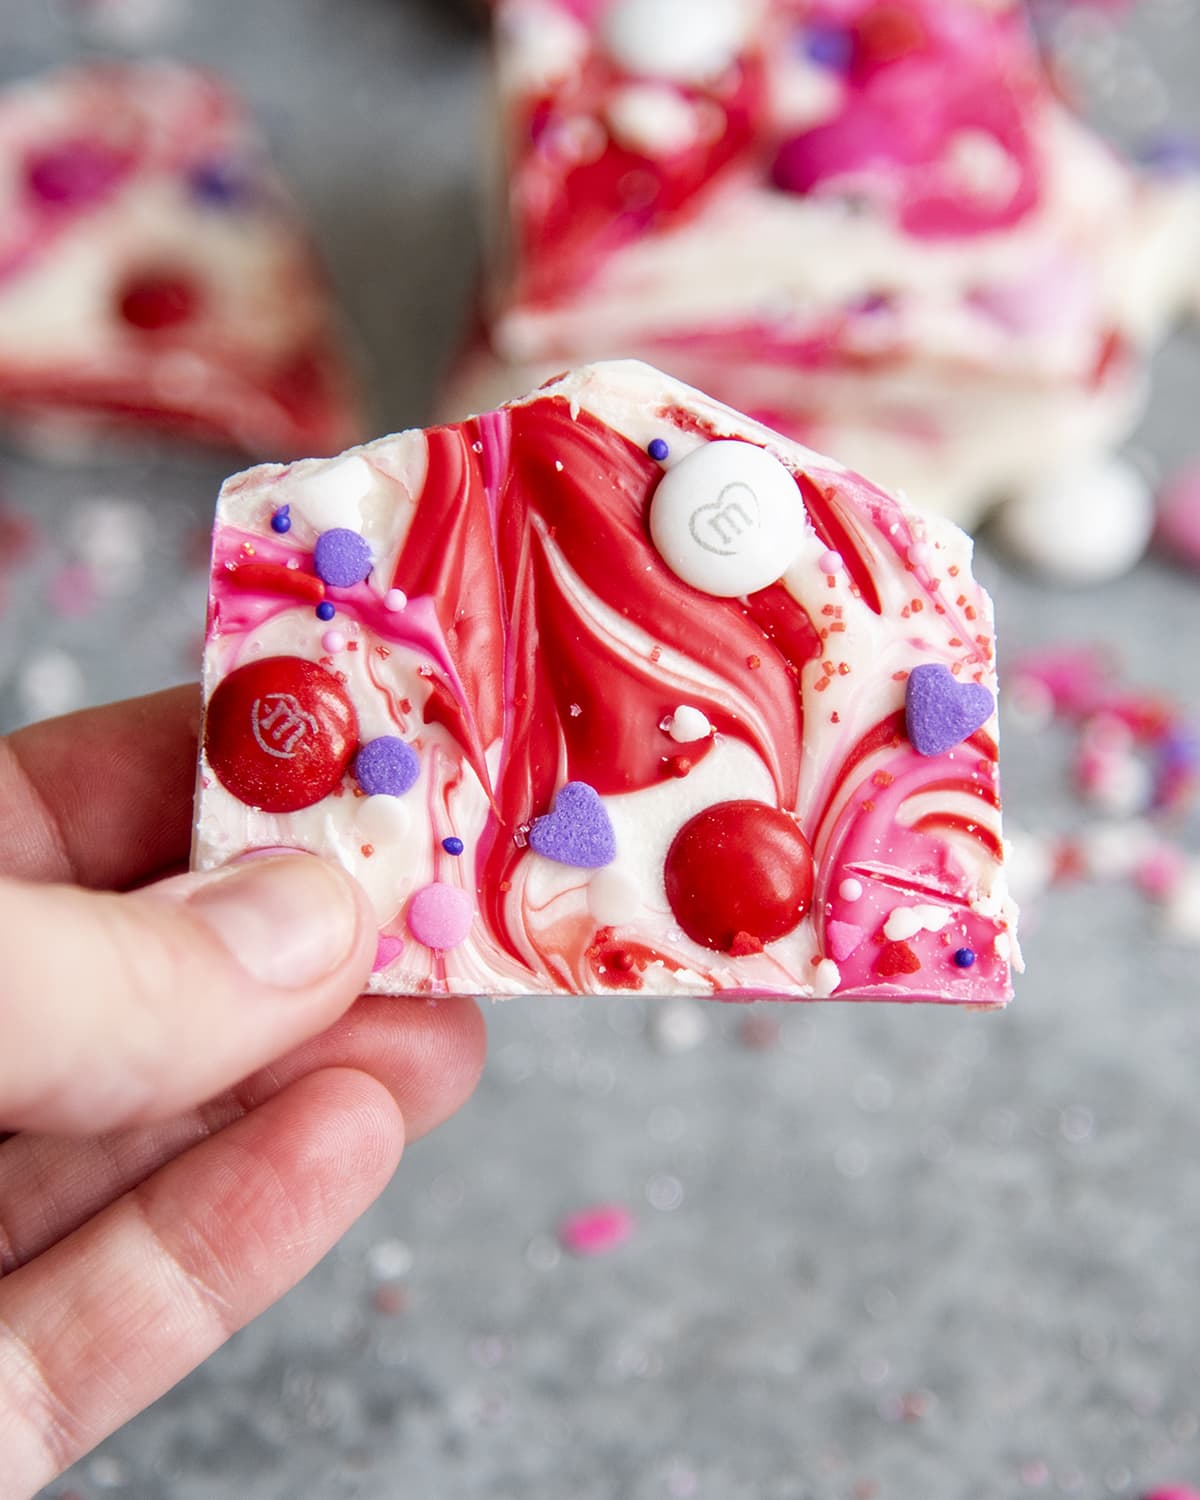 A hand holding a piece of white chocolate bark with swirls of red and pink chocolate and m&ms on top.